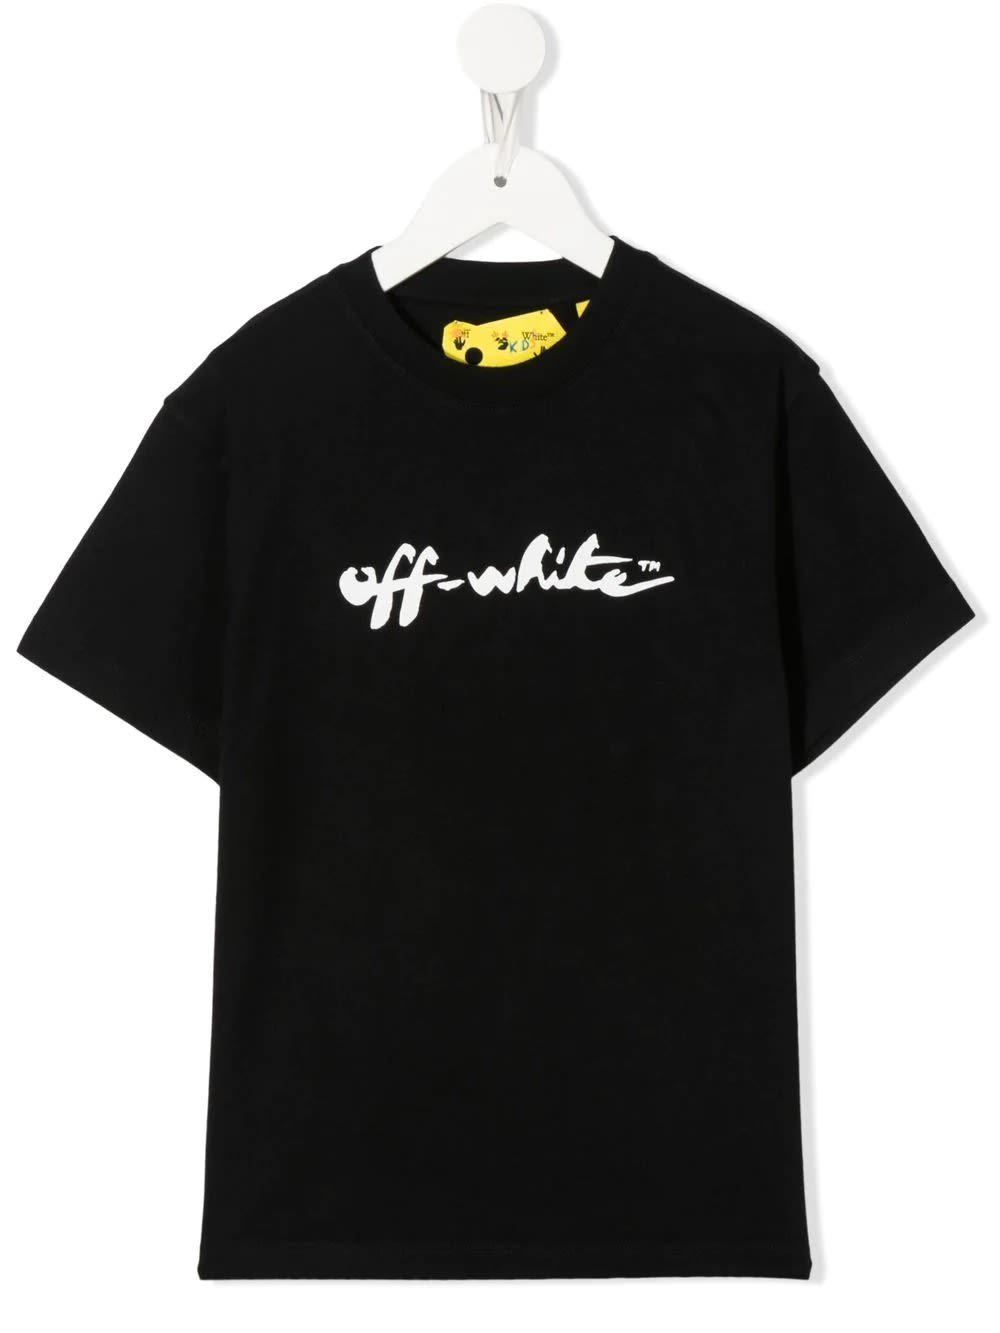 Off-White Kids Black T-shirt With Signature And Arrow Motif